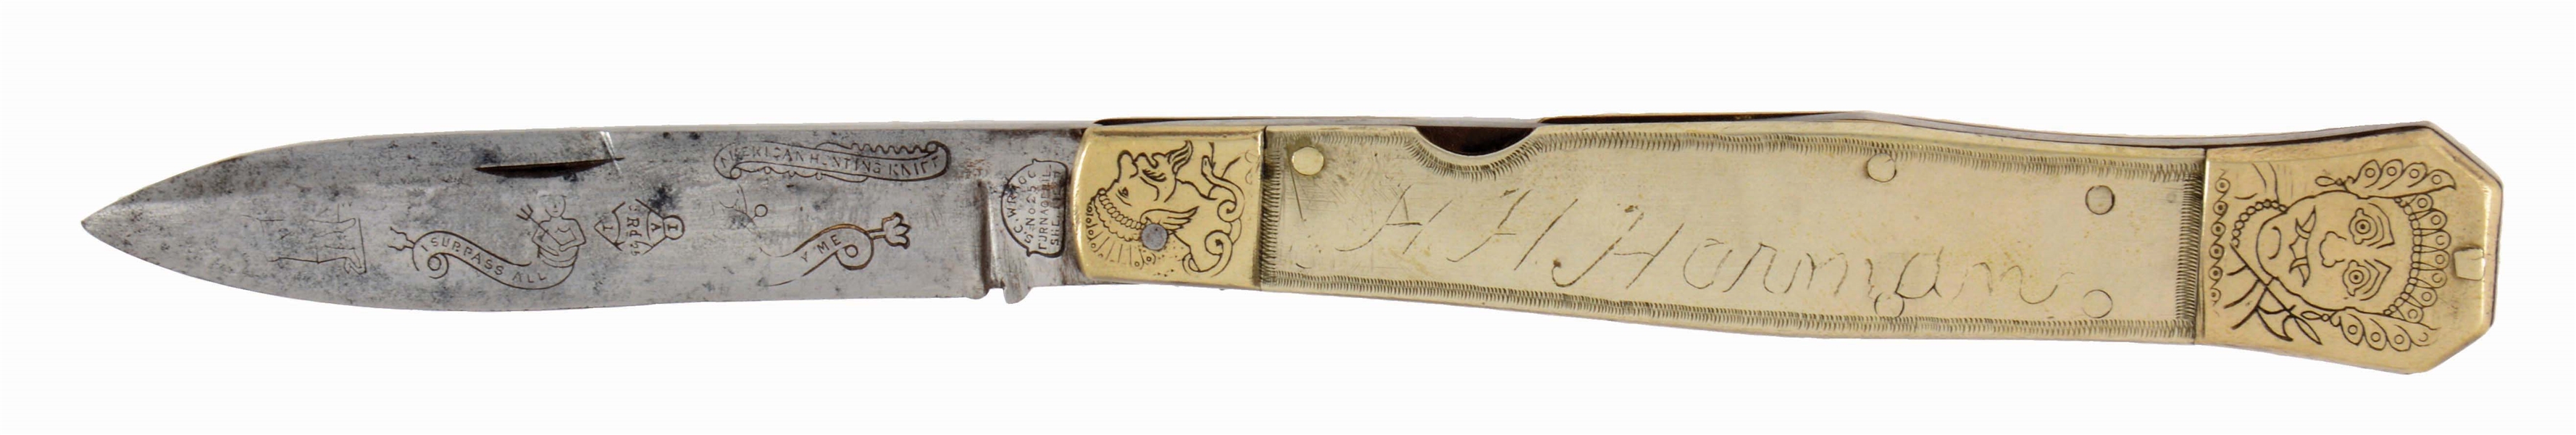 WRAGG FOLDING BOWIE KNIFE WITH PERSONALIZED SCALES.